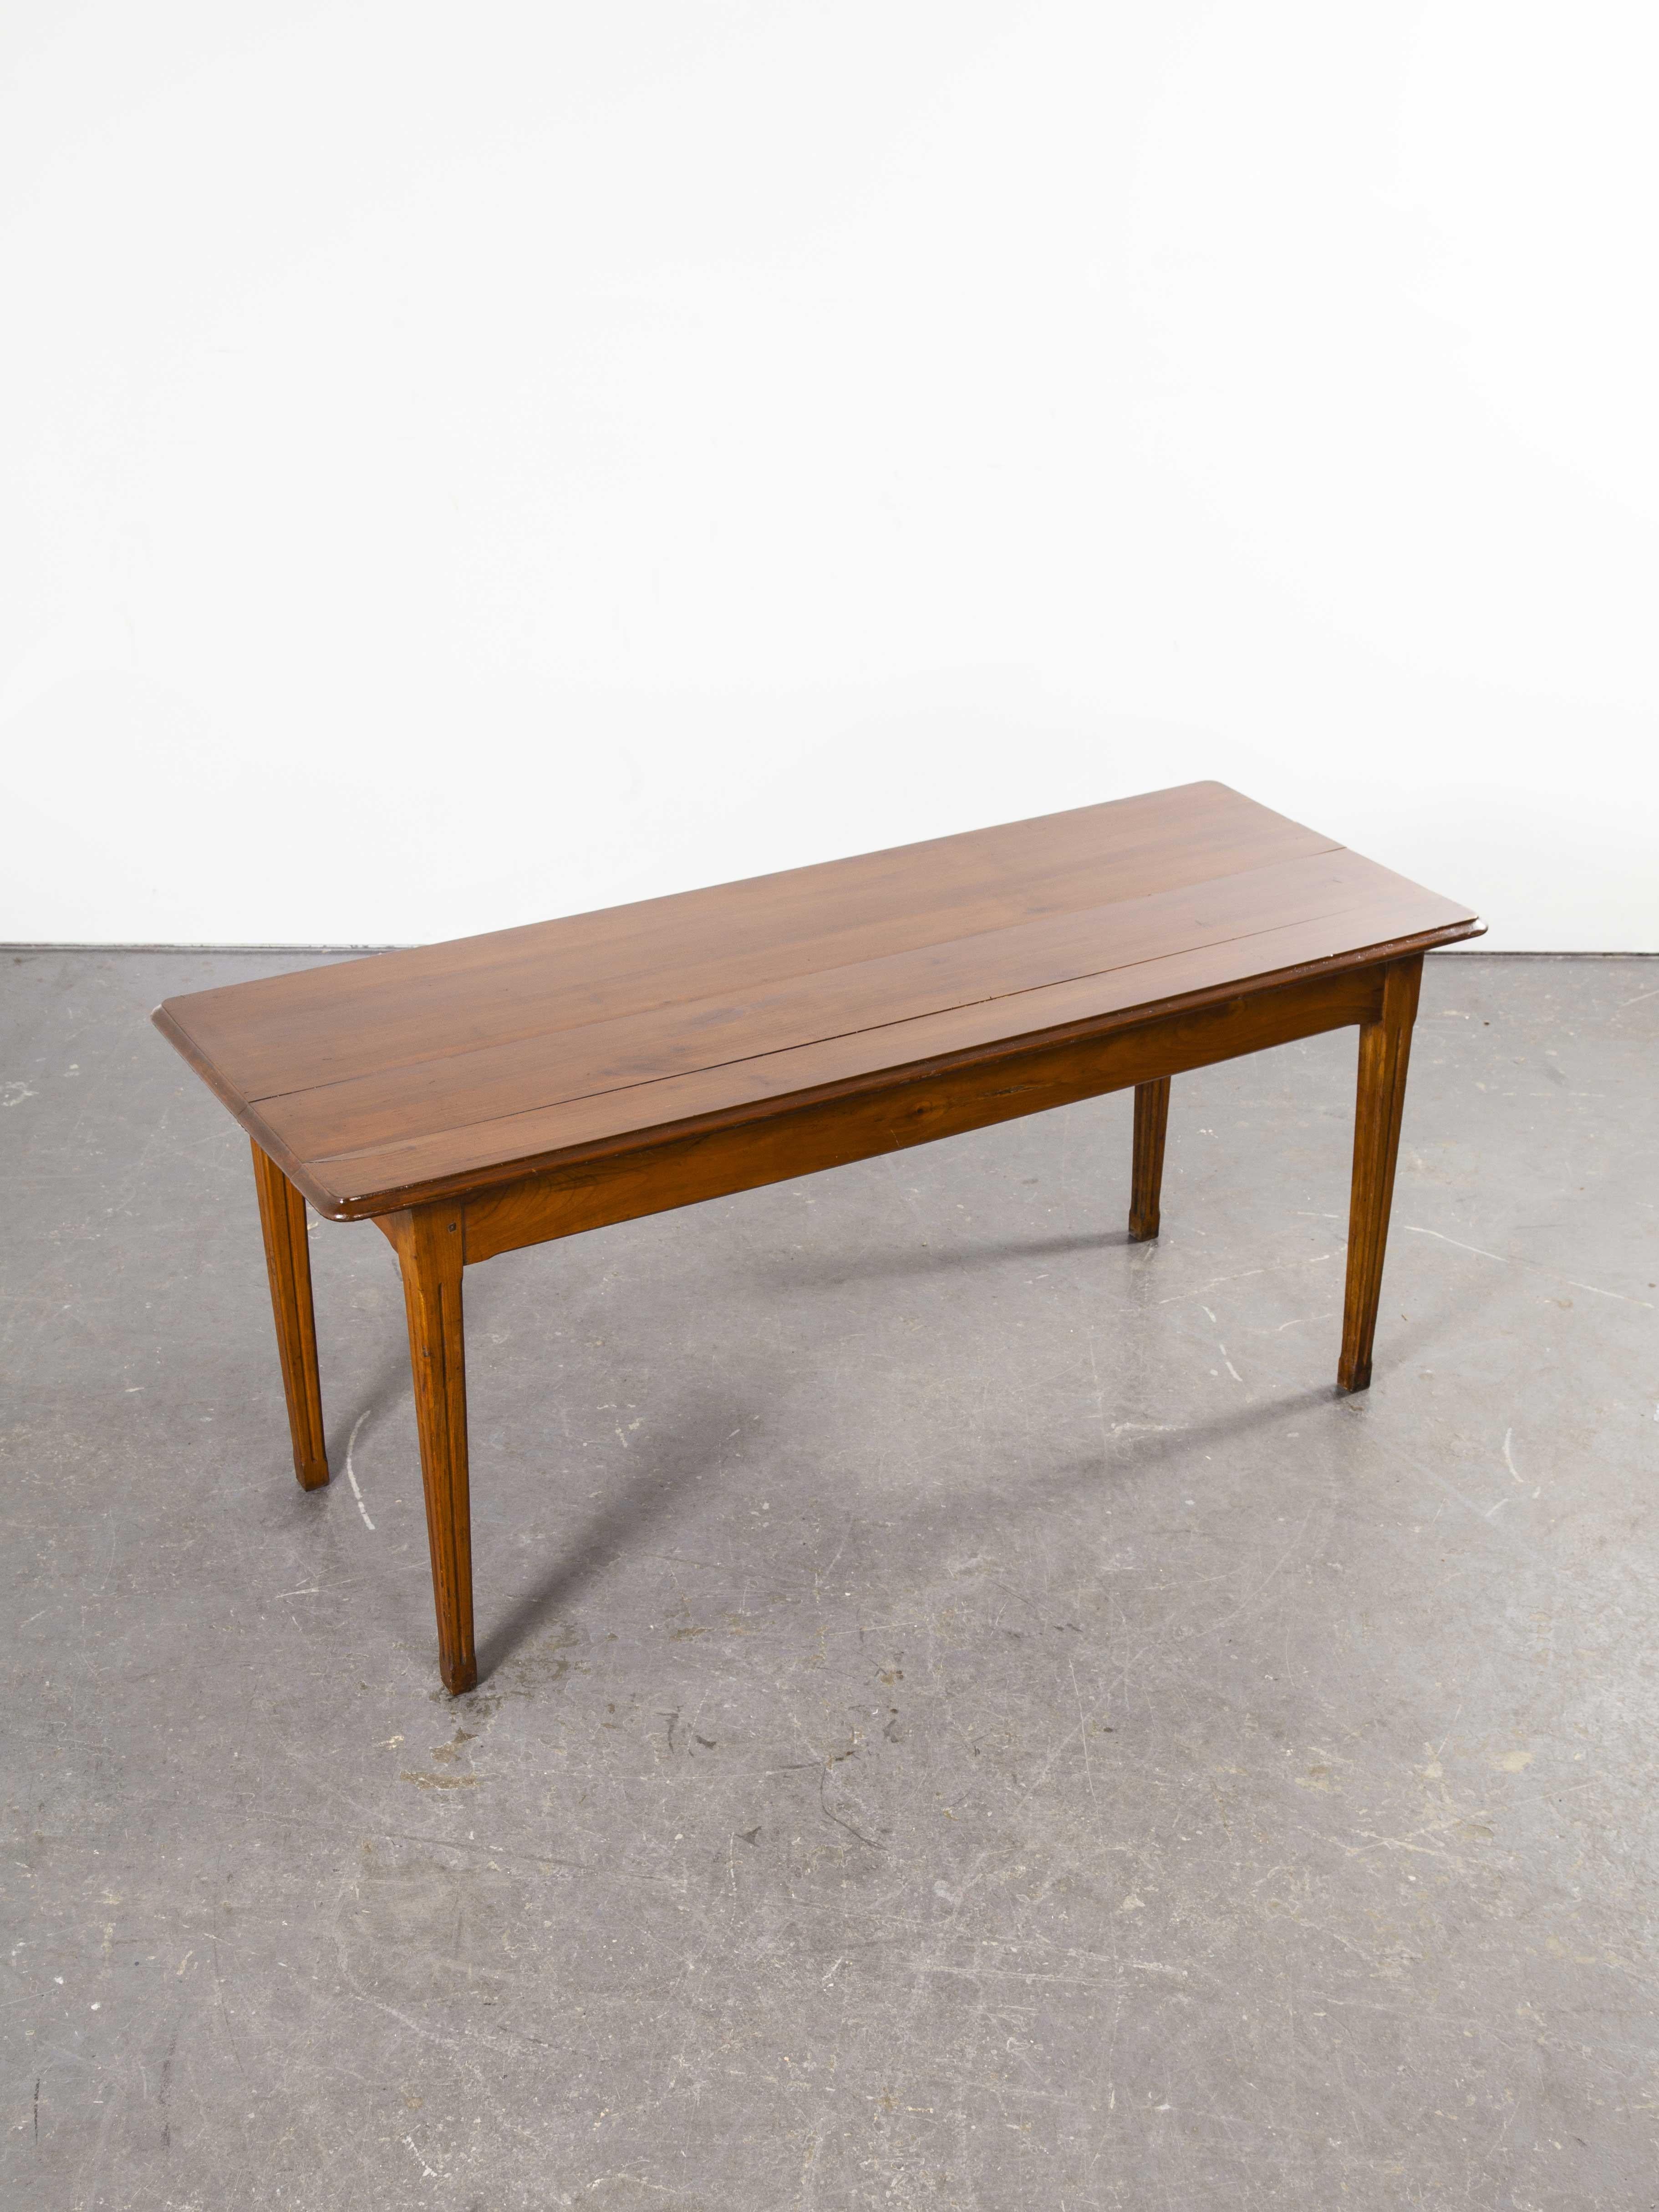 1950s French pear wood rectangular dining table (Model 3)

1950s French pear wood rectangular dining table. Sourced in Alsace this is a good honest solid pear wood rectangular dining table. Good proportions and good detail on the tops and with